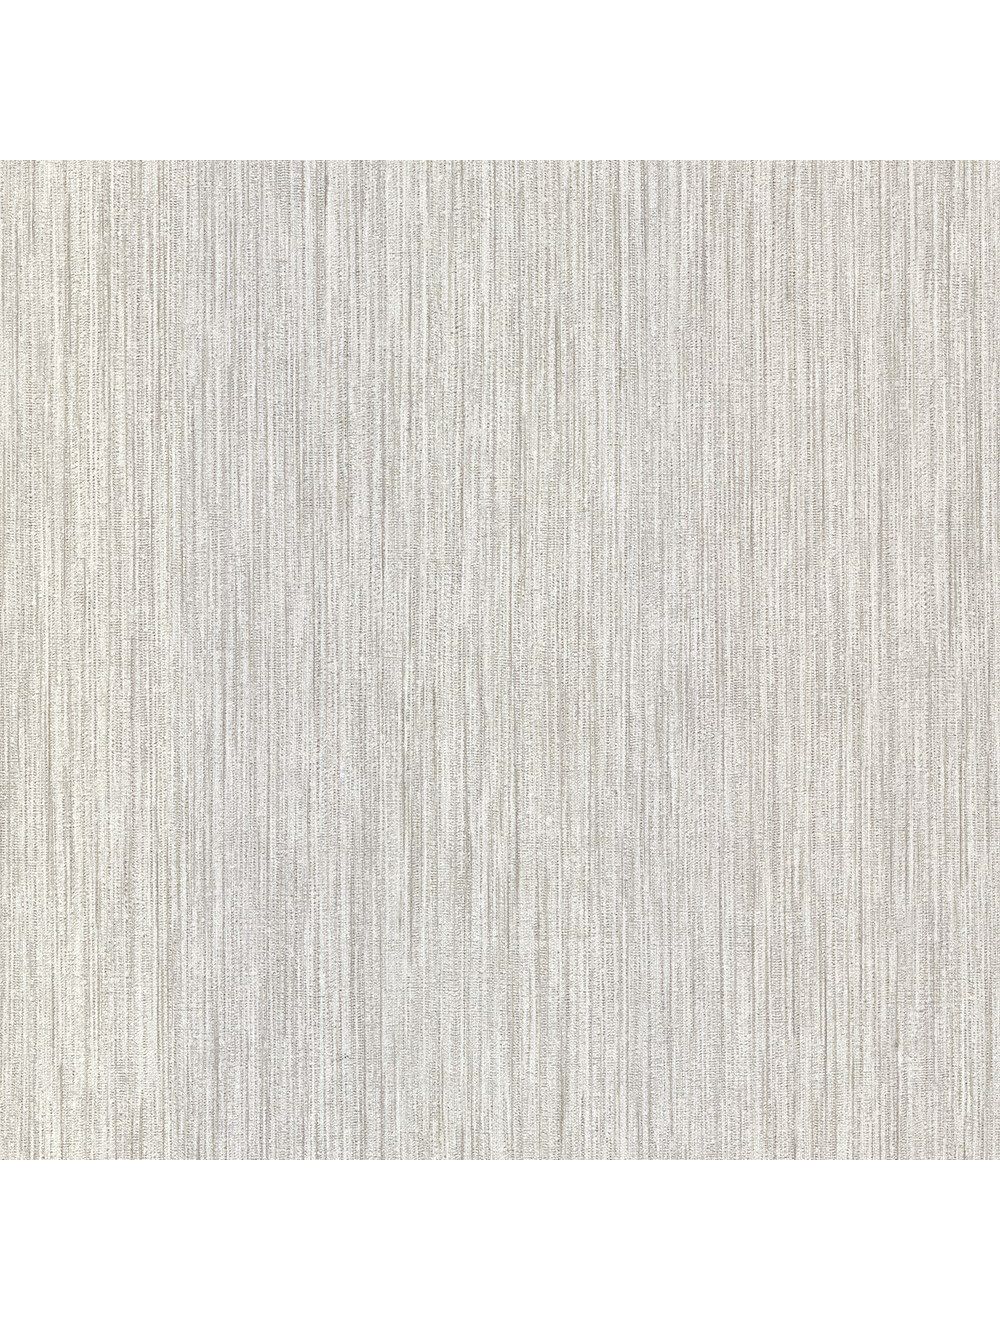 Luciano Beige Fabric Effect Tough Texture Wallpaper by Belgravia GB3855 